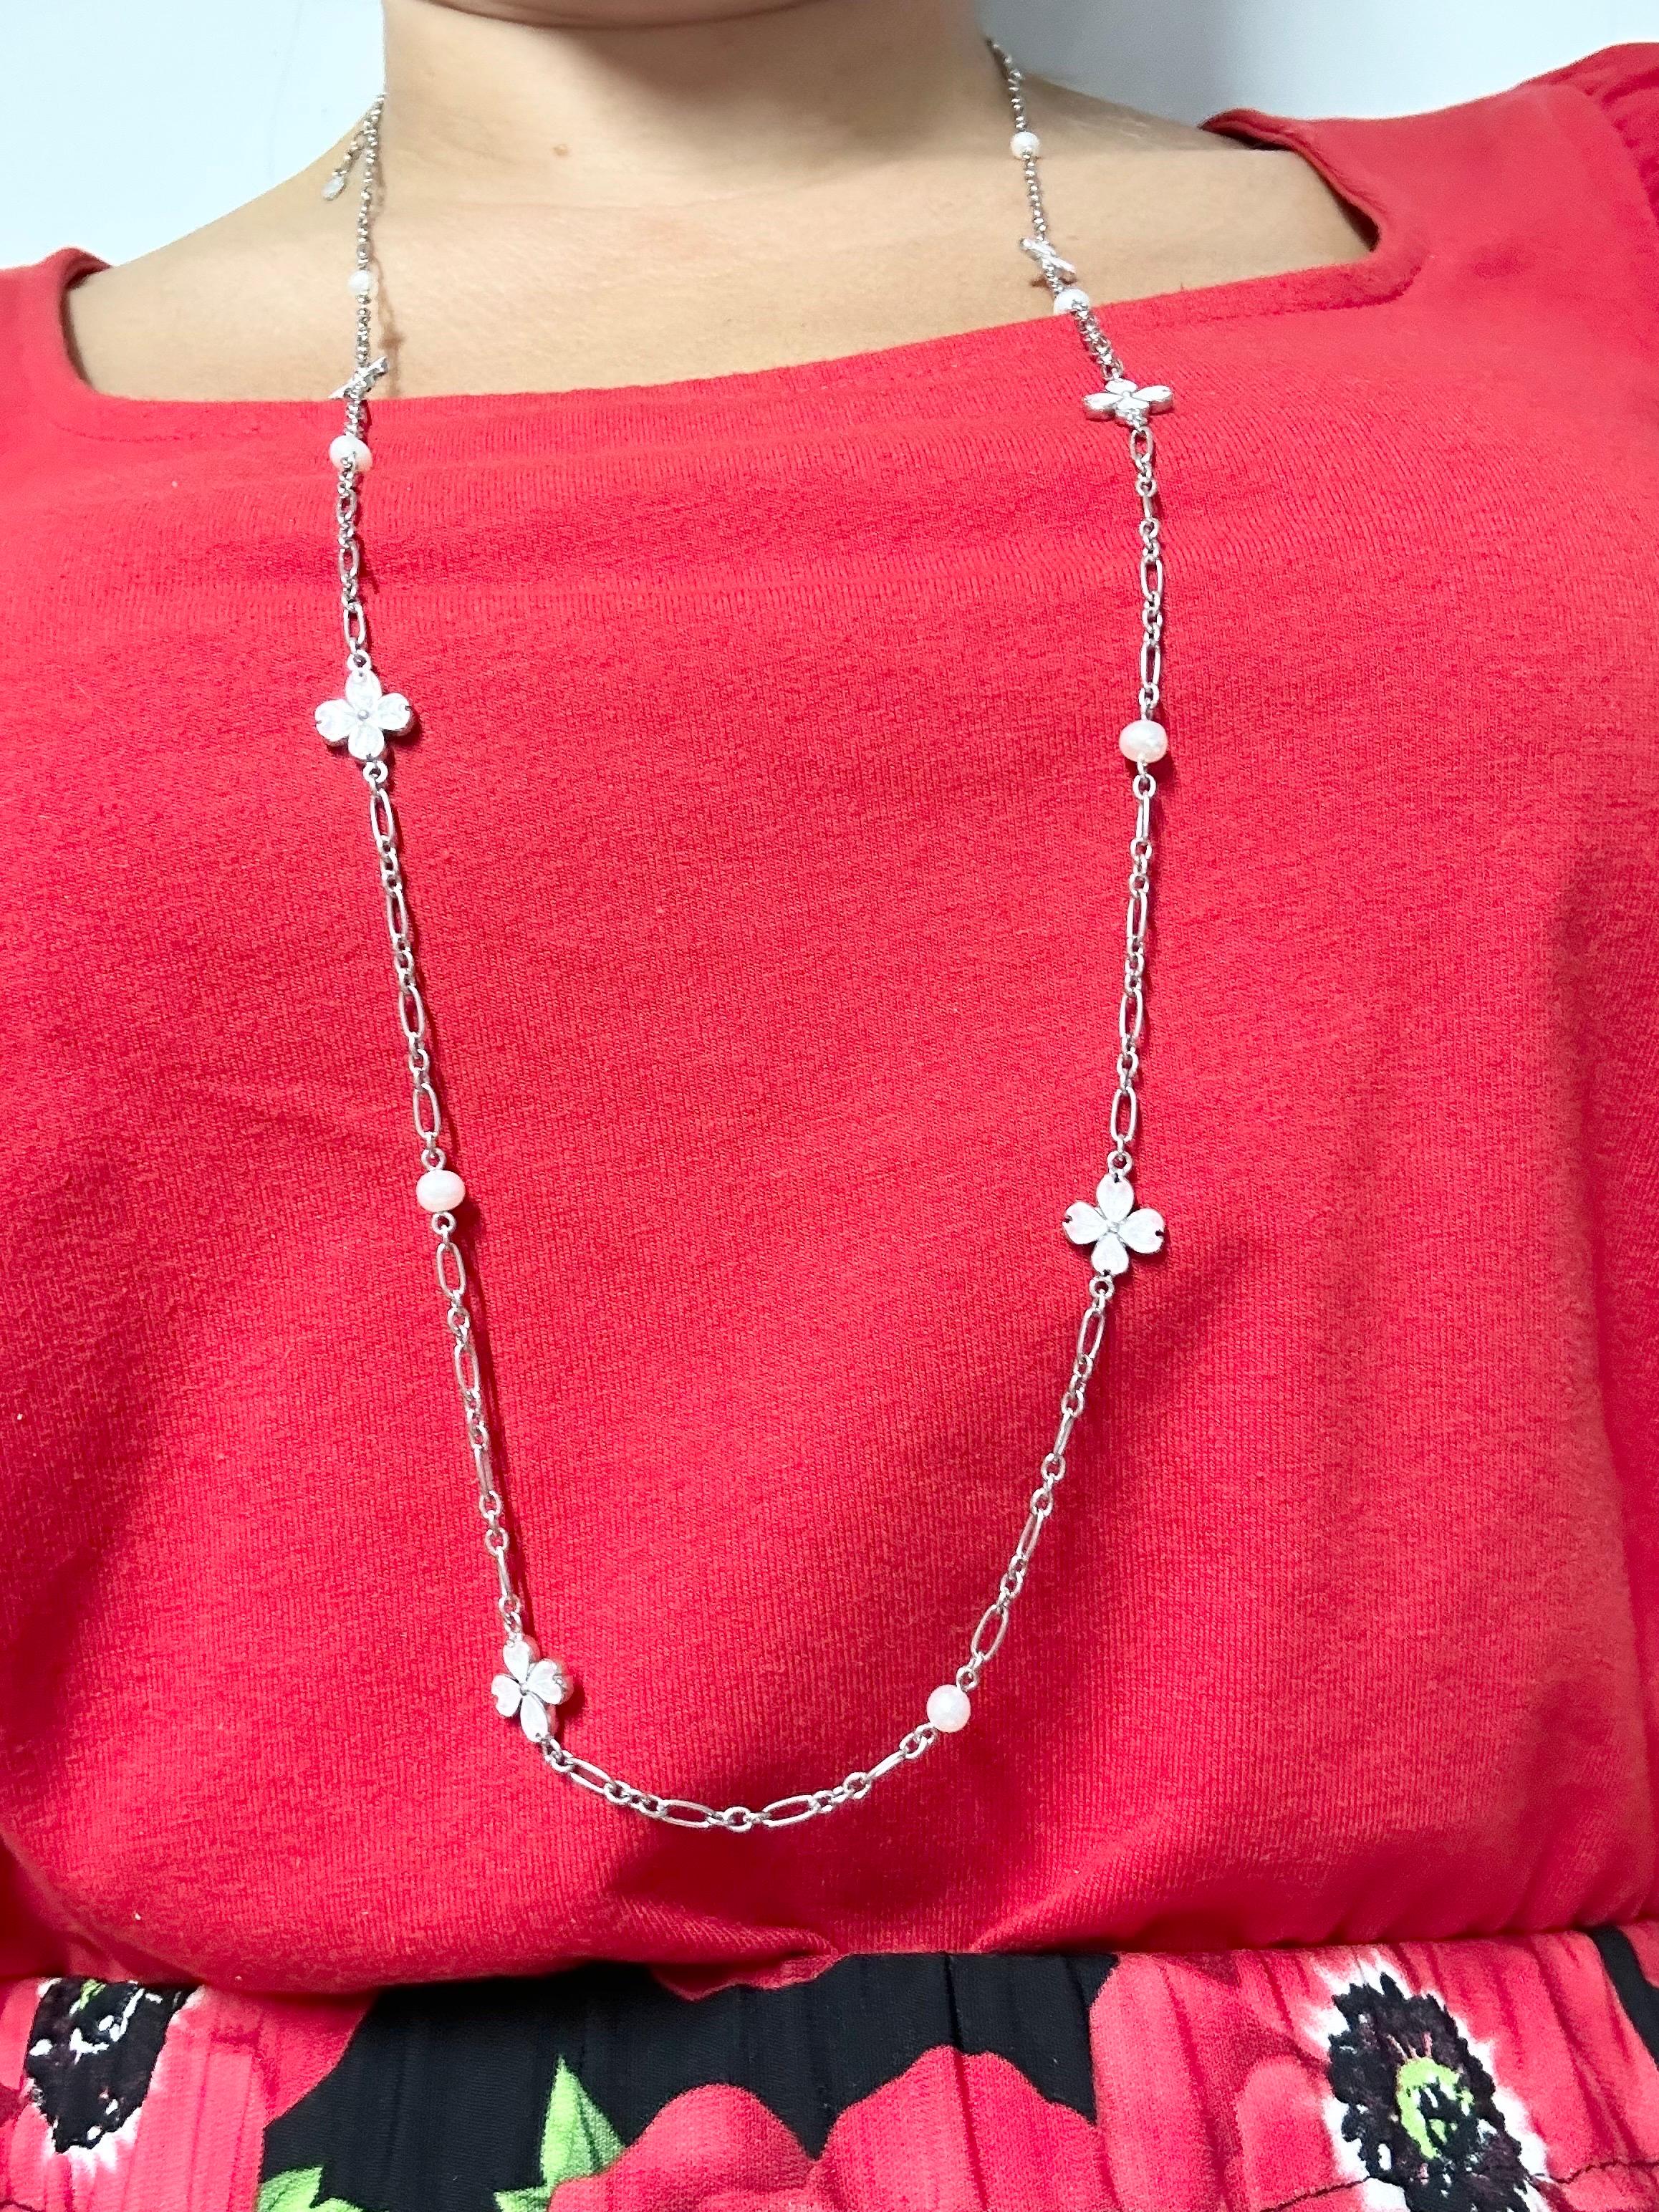 Enamel long chain necklace 925 silver chain  In New Condition For Sale In Jupiter, FL